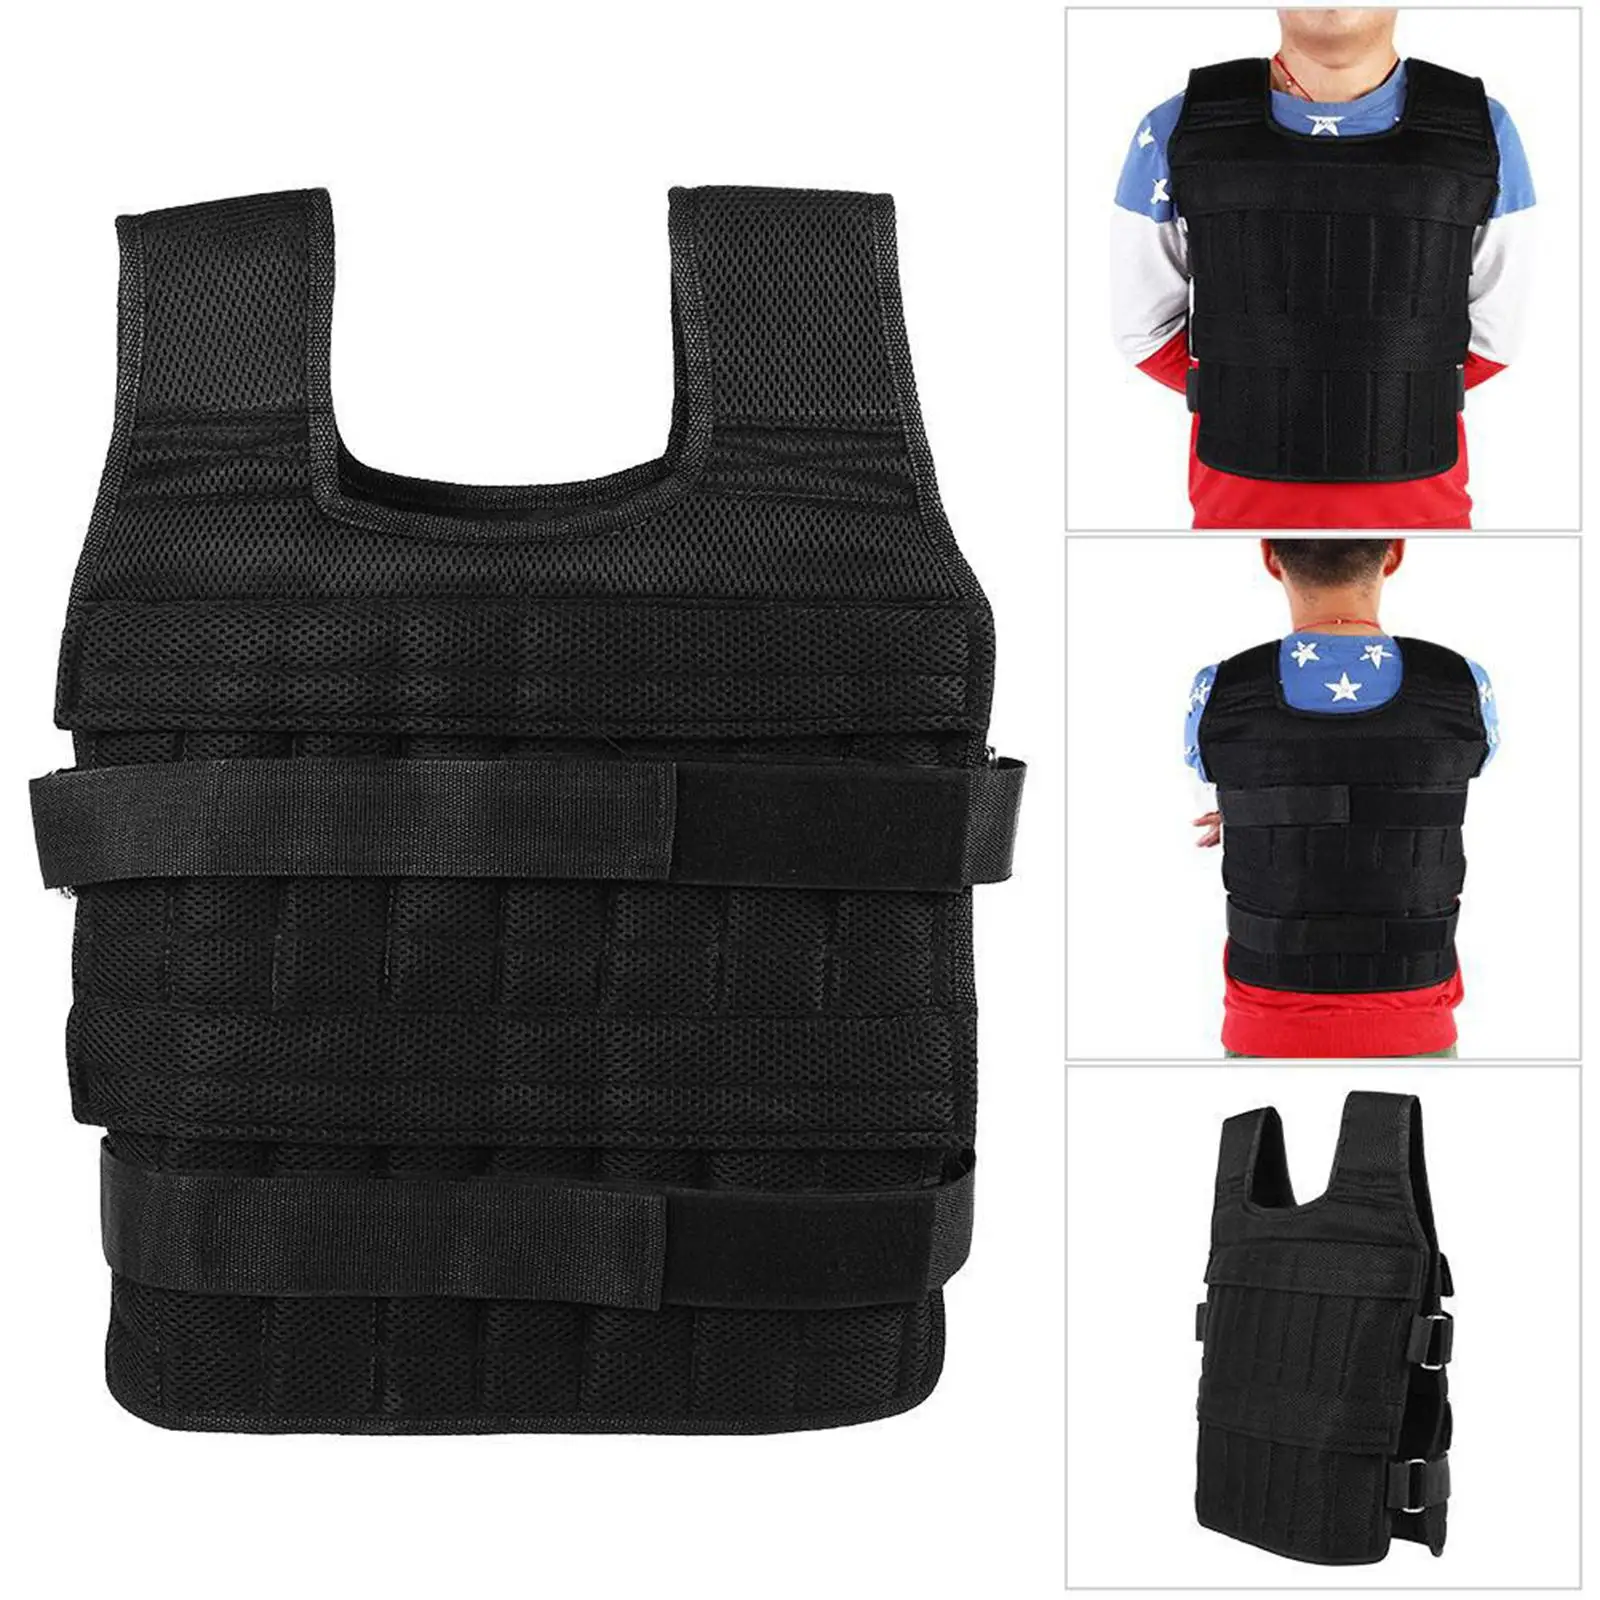 50KG Weight Vest For Boxing Weight Training Workout Fitness Gym Equipment Adjustable Waistcoat Jacket sand cloth